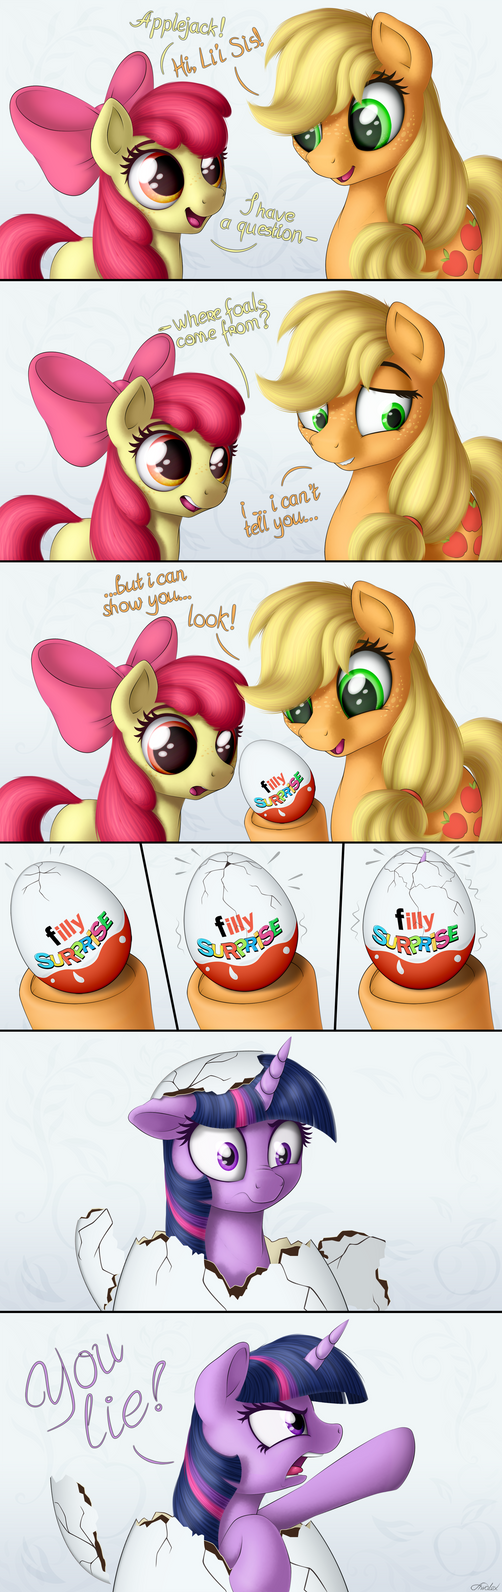 filly_surprise_by_awalex_dcu1c1e-pre.png